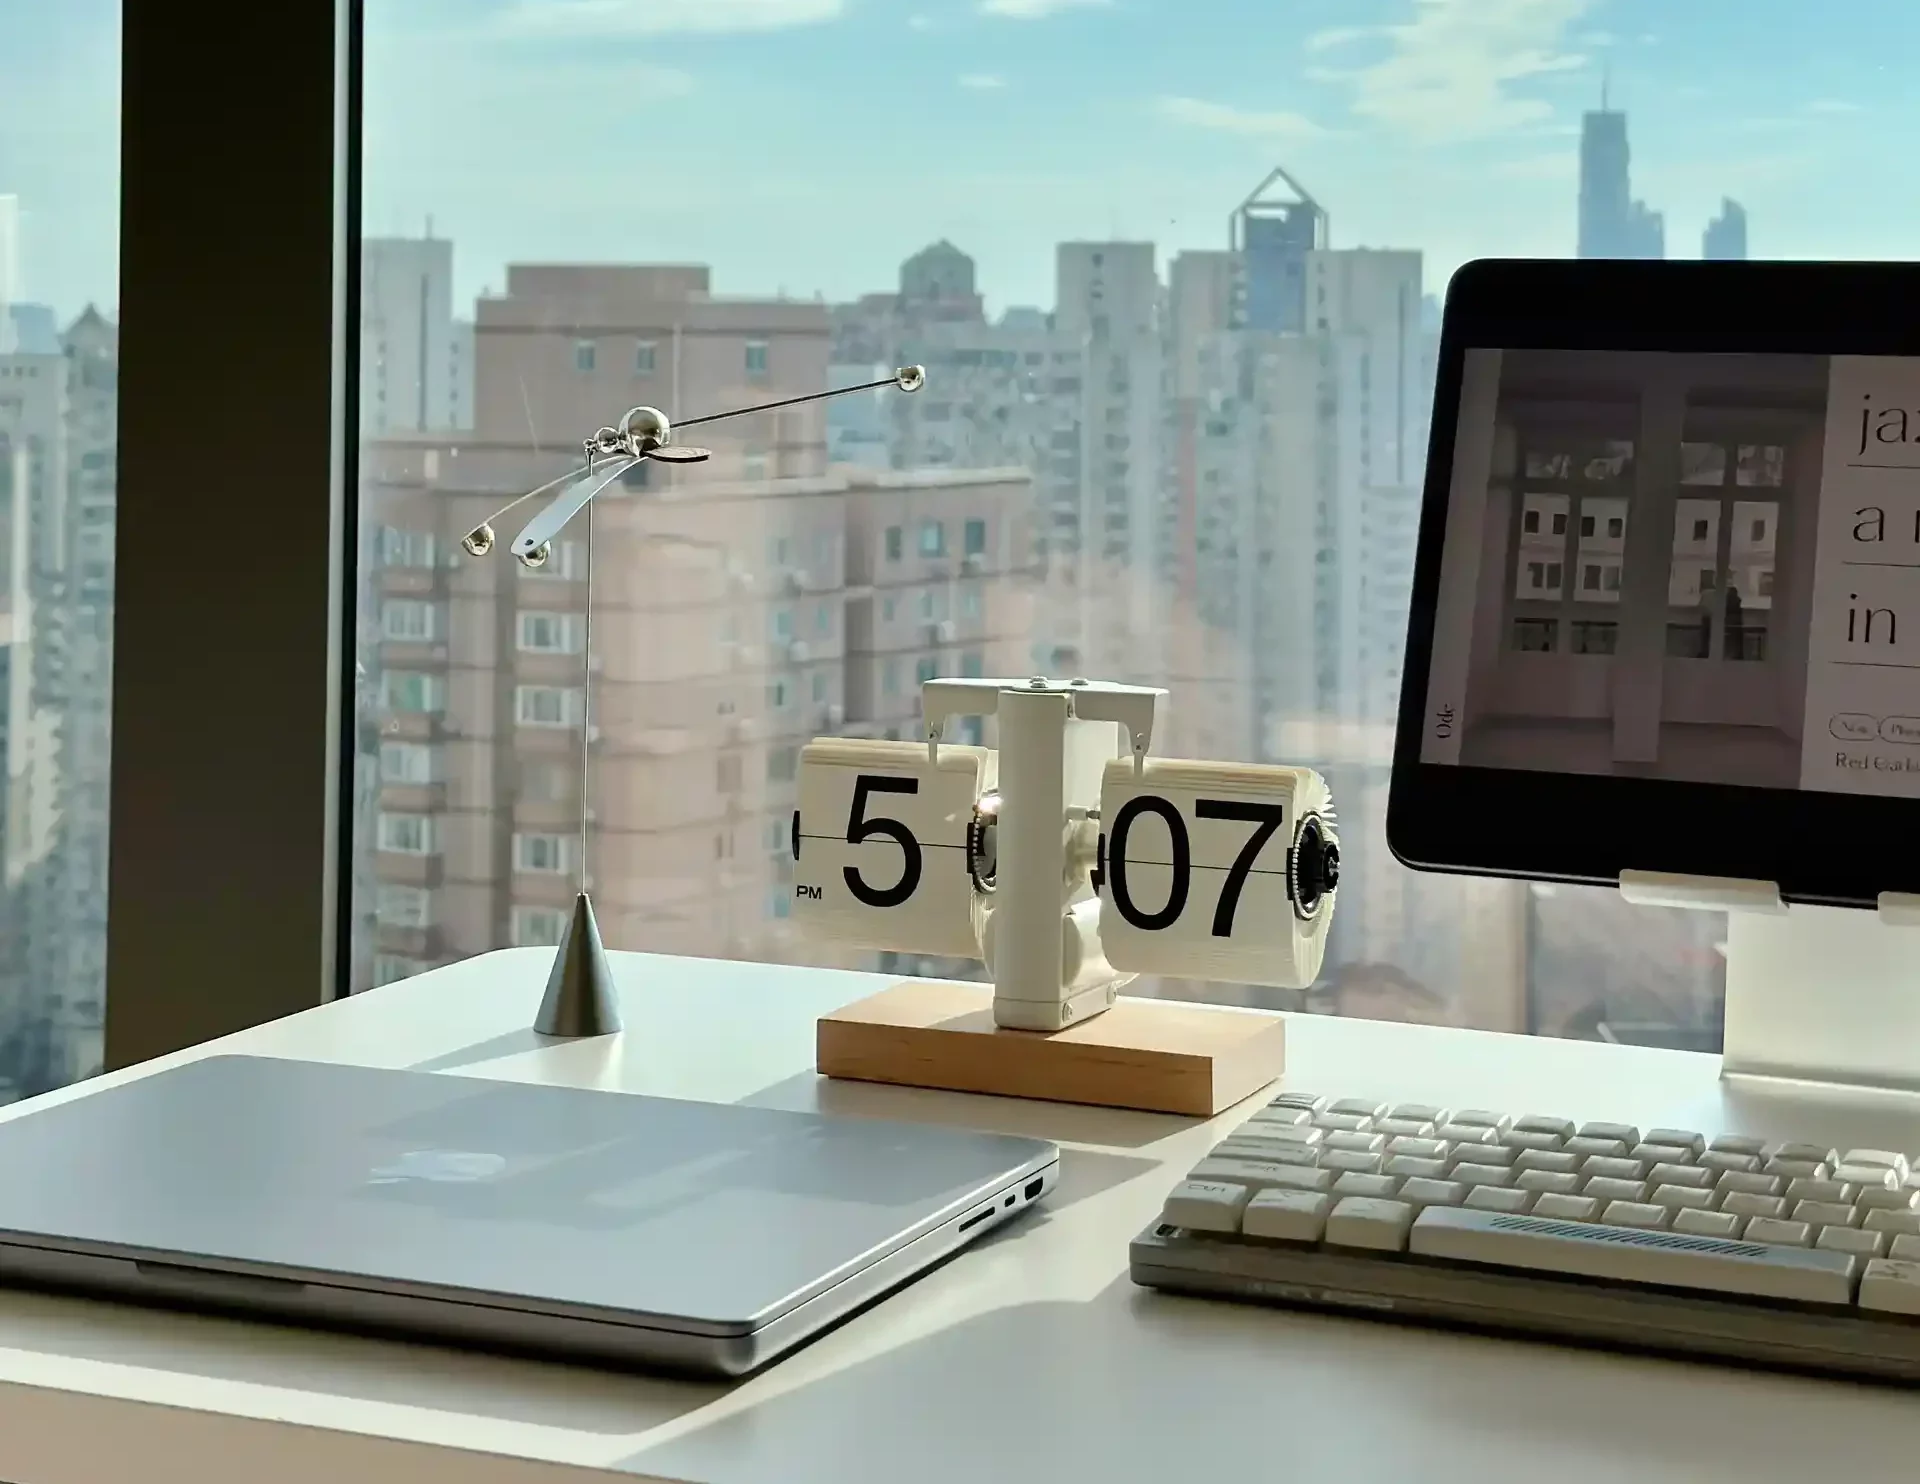 A modern workspace beside a window, with a laptop, digital clock displaying 5:07 PM, and retro style keyboard, and a metallic articulating lamp.